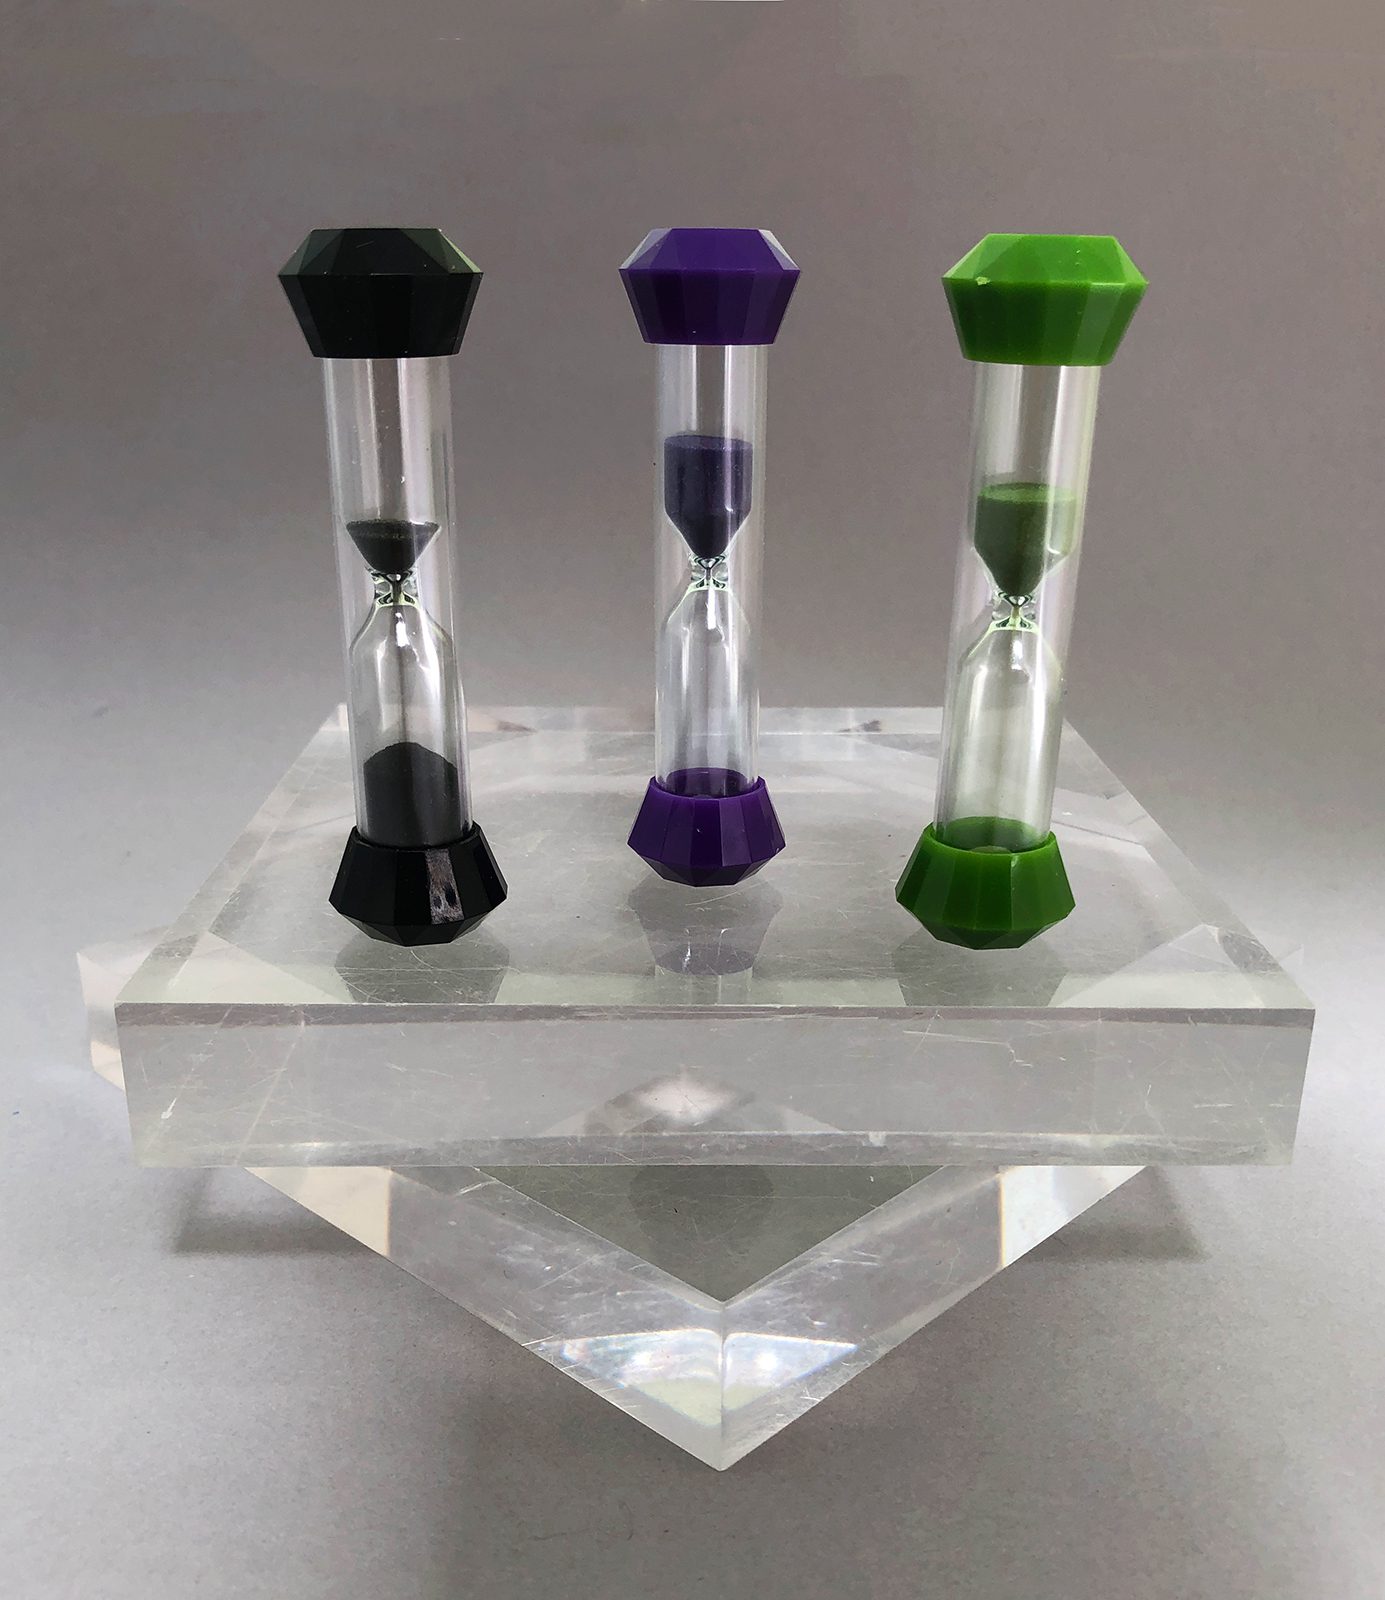 The Sand Timers.